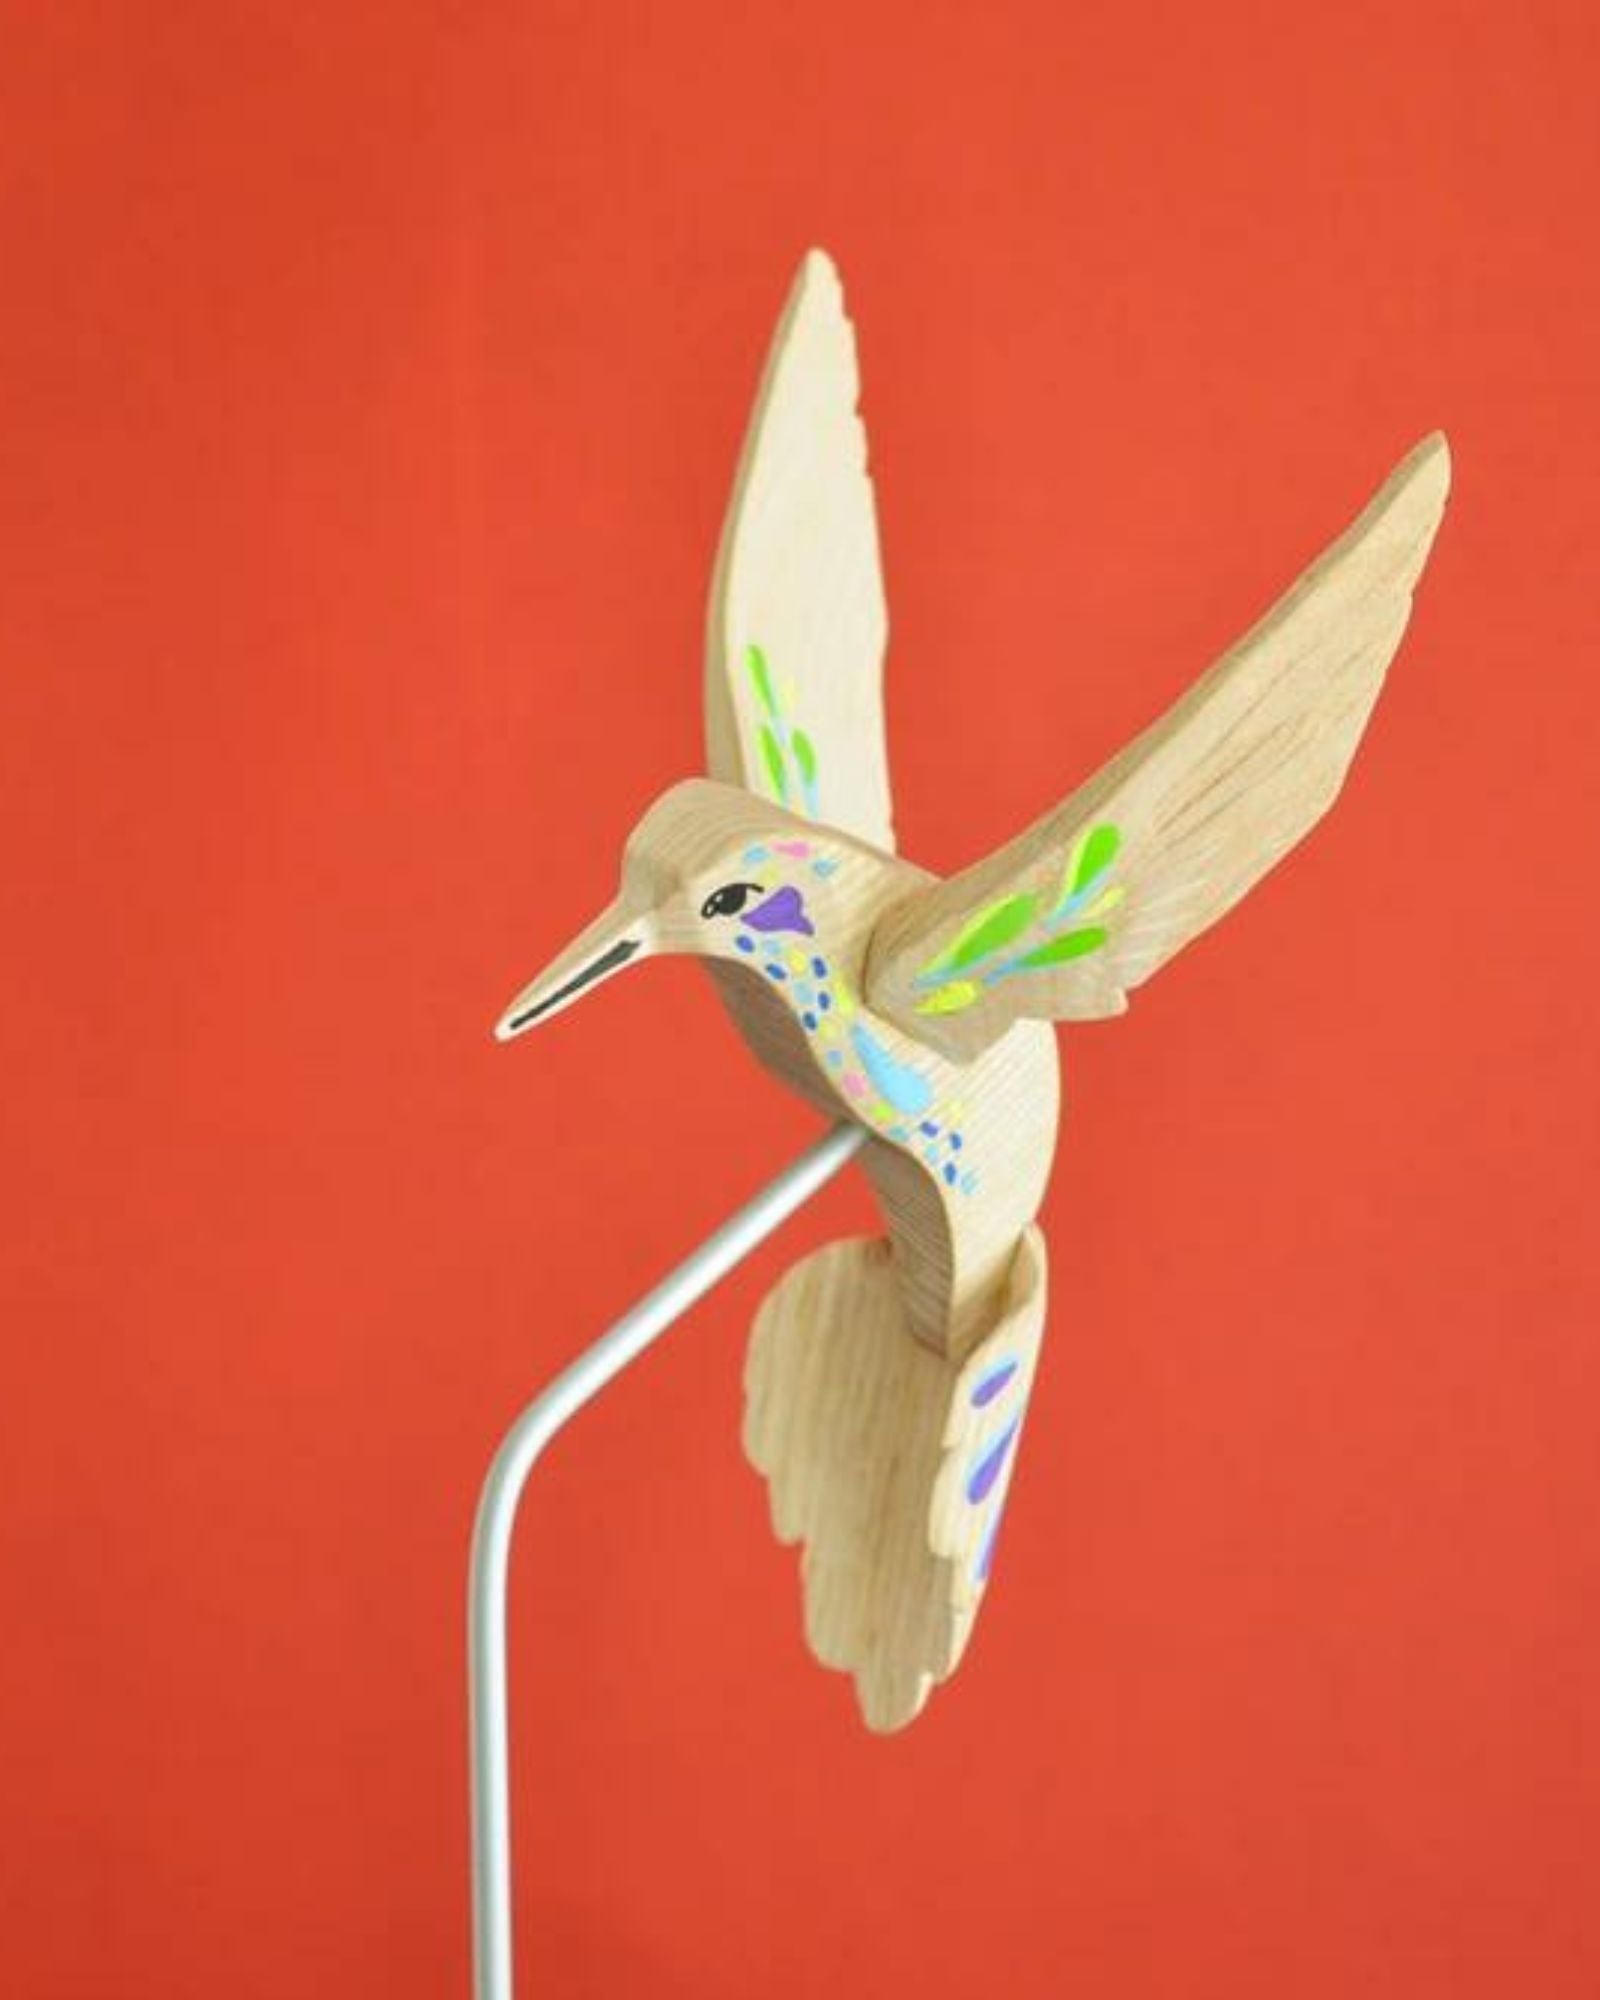 La Petite Hirondelle - Crafted with care, wooden hummingbird sculpture